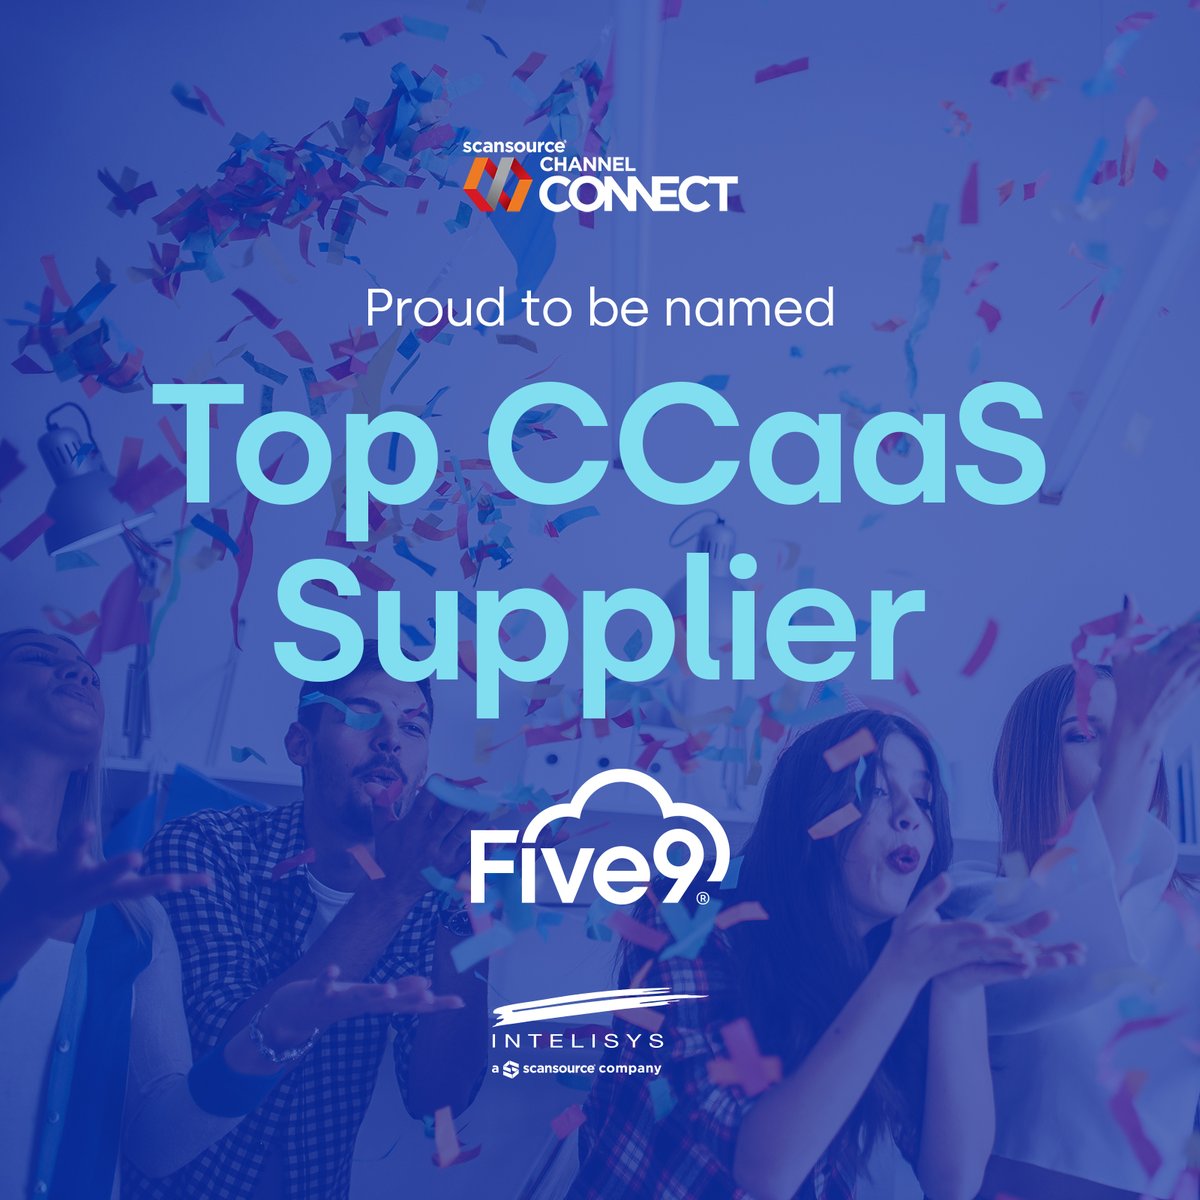 #Five9 has been awarded the 2023 Top CCaaS Supplier Partner Award at the @ScanSource #ChannelConnect2023 in Orlando, Florida. Learn more in this #PressRelease: spr.ly/6013udsTz. #PartnerPowered @IntelisysCorp